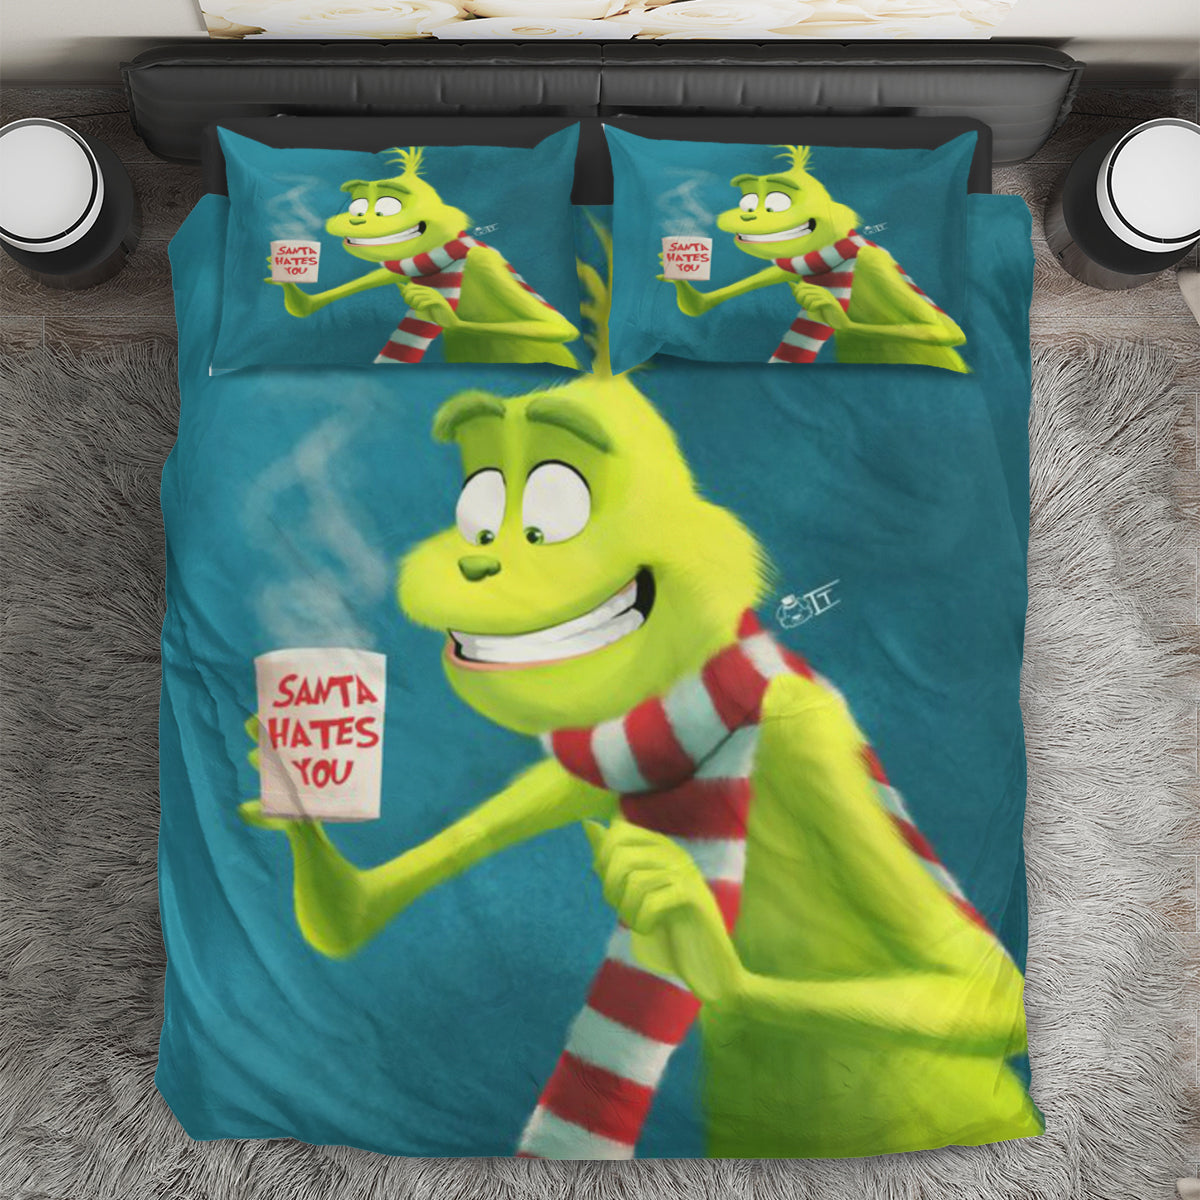 The Grinch Christmas Grinch With Coffee-Cup 3PCS Bedding Set Duvet Cover And Pillow Cases Gift For Fan